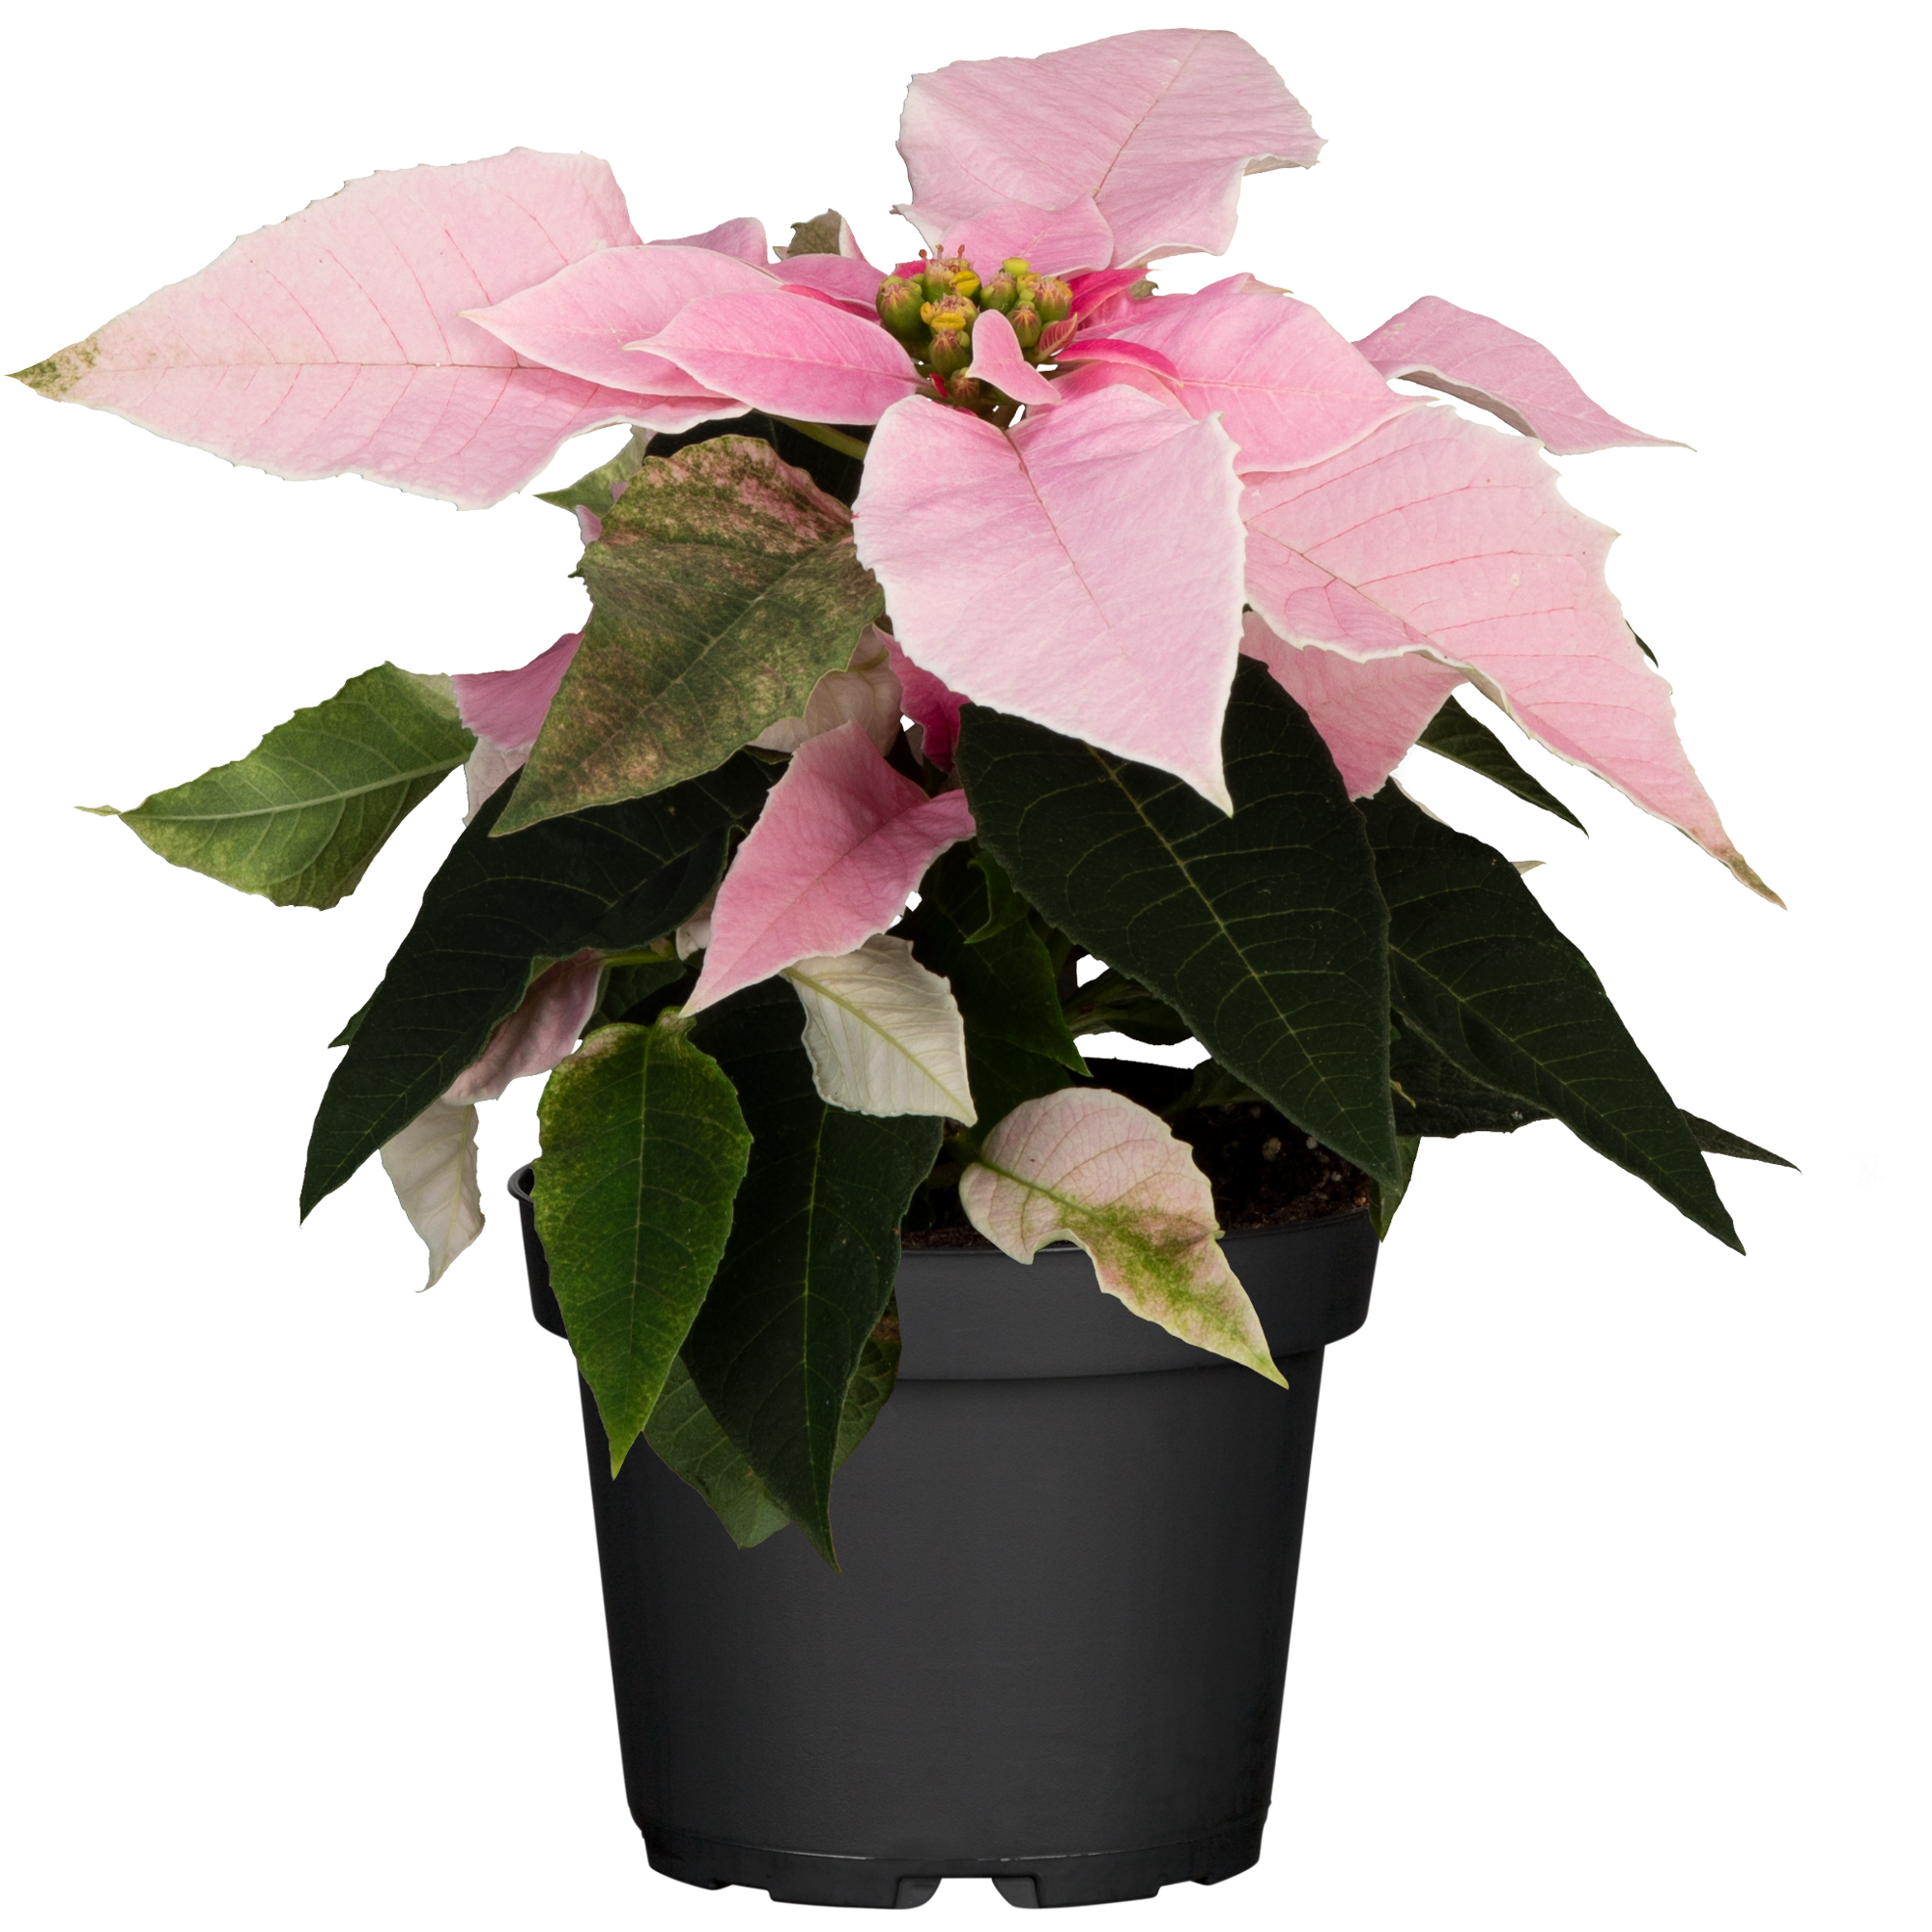 Fairtrade Weihnachtsstern rosa 10,5 cm Topf + product picture